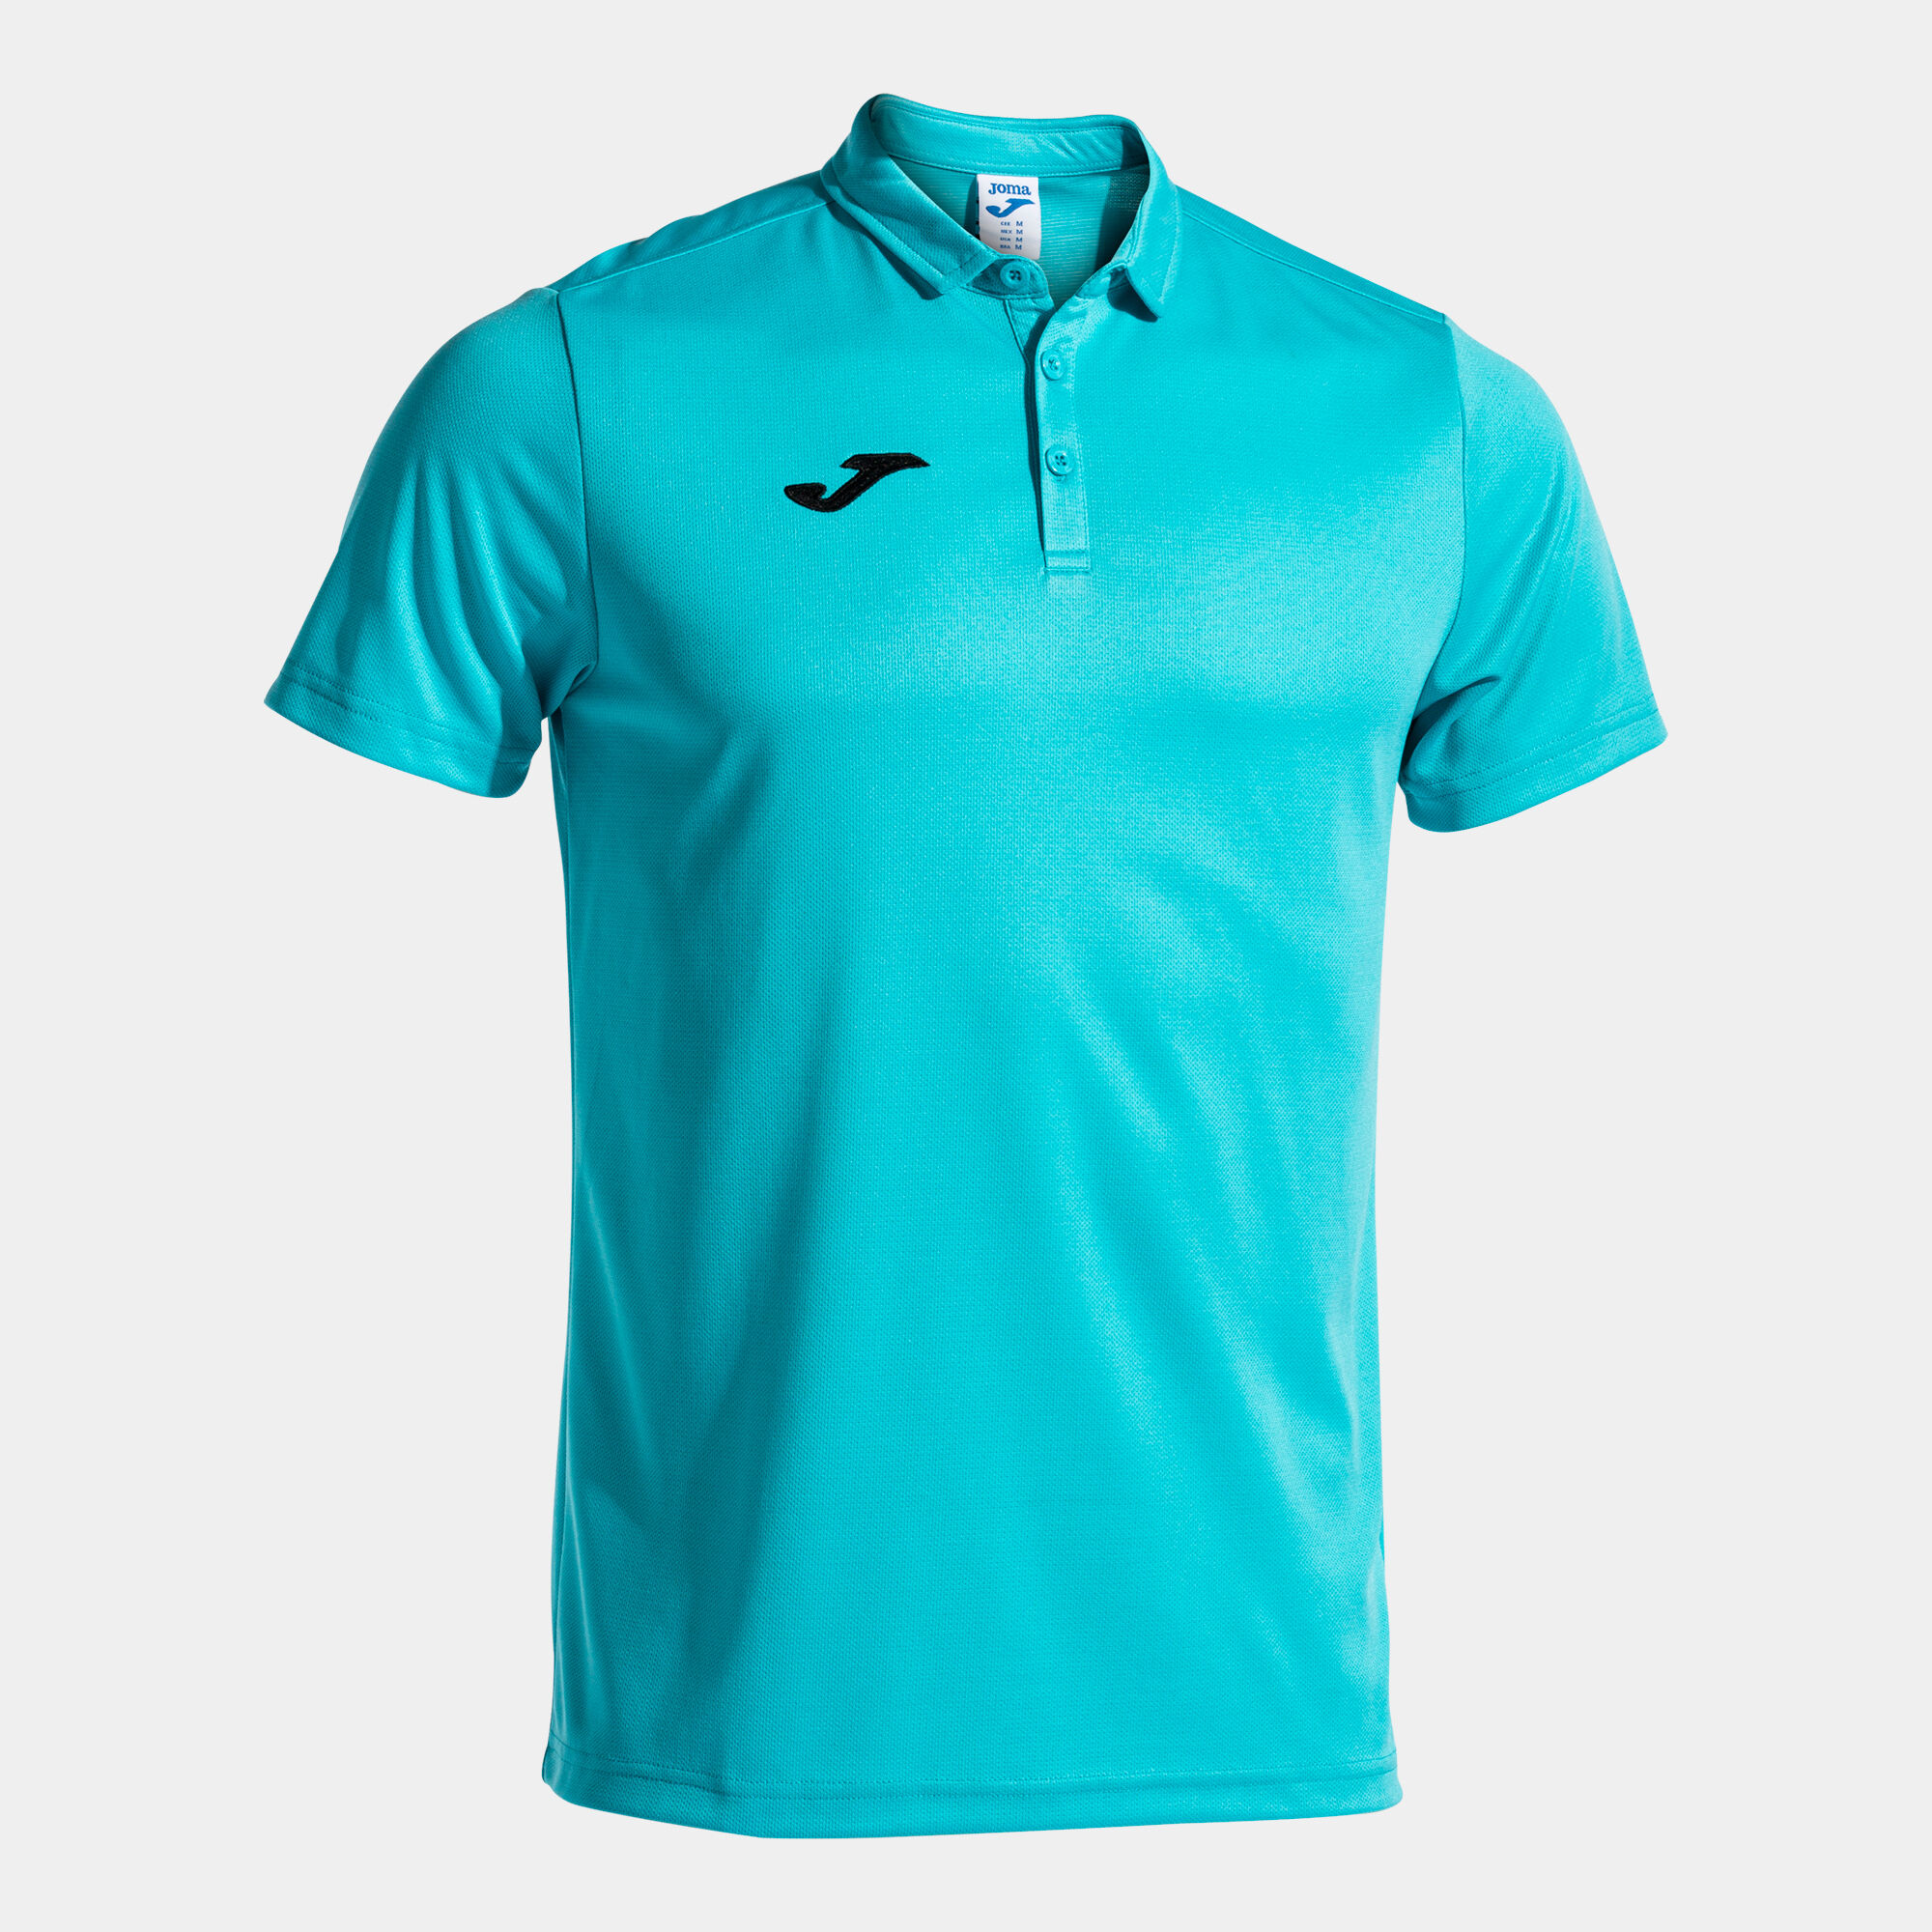 Polo manches courtes homme Hobby turquoise fluo